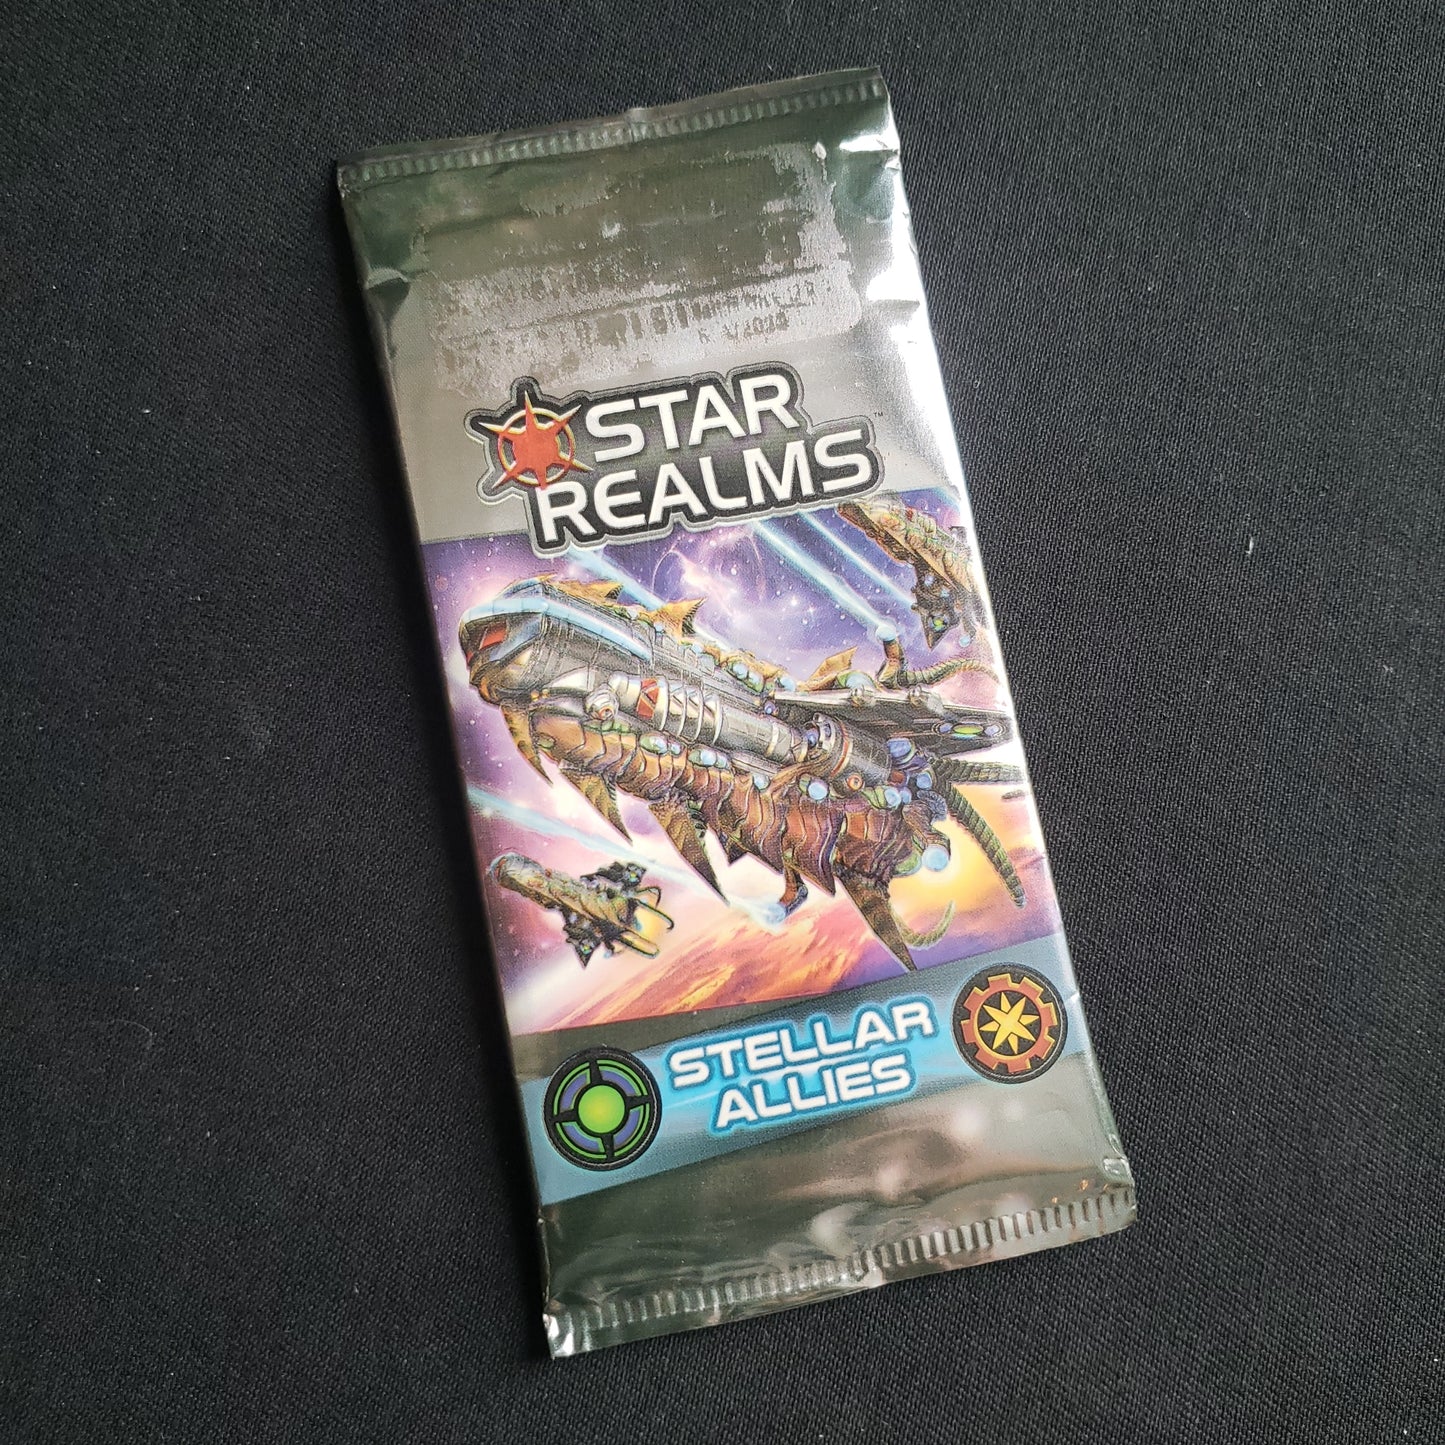 Image shows the front of the package for the Stellar Allies Expansion pack for the Star Realms card game